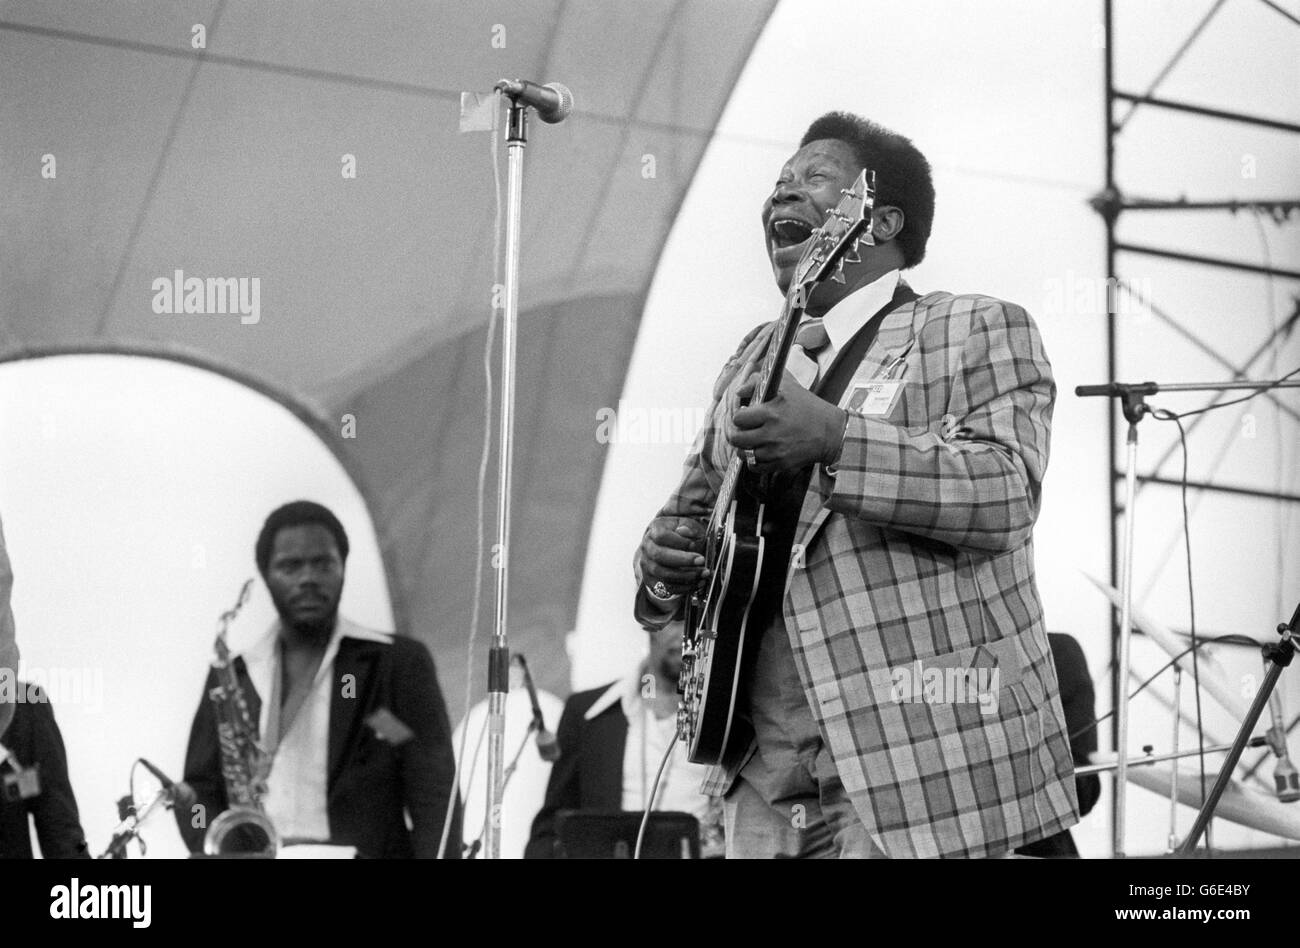 B.B. King, the celebrated American blues guitarist, on stage at Alexander Palace in North London during the Capital Radio Jazz Festival, a six-day extravaganza. Stock Photo